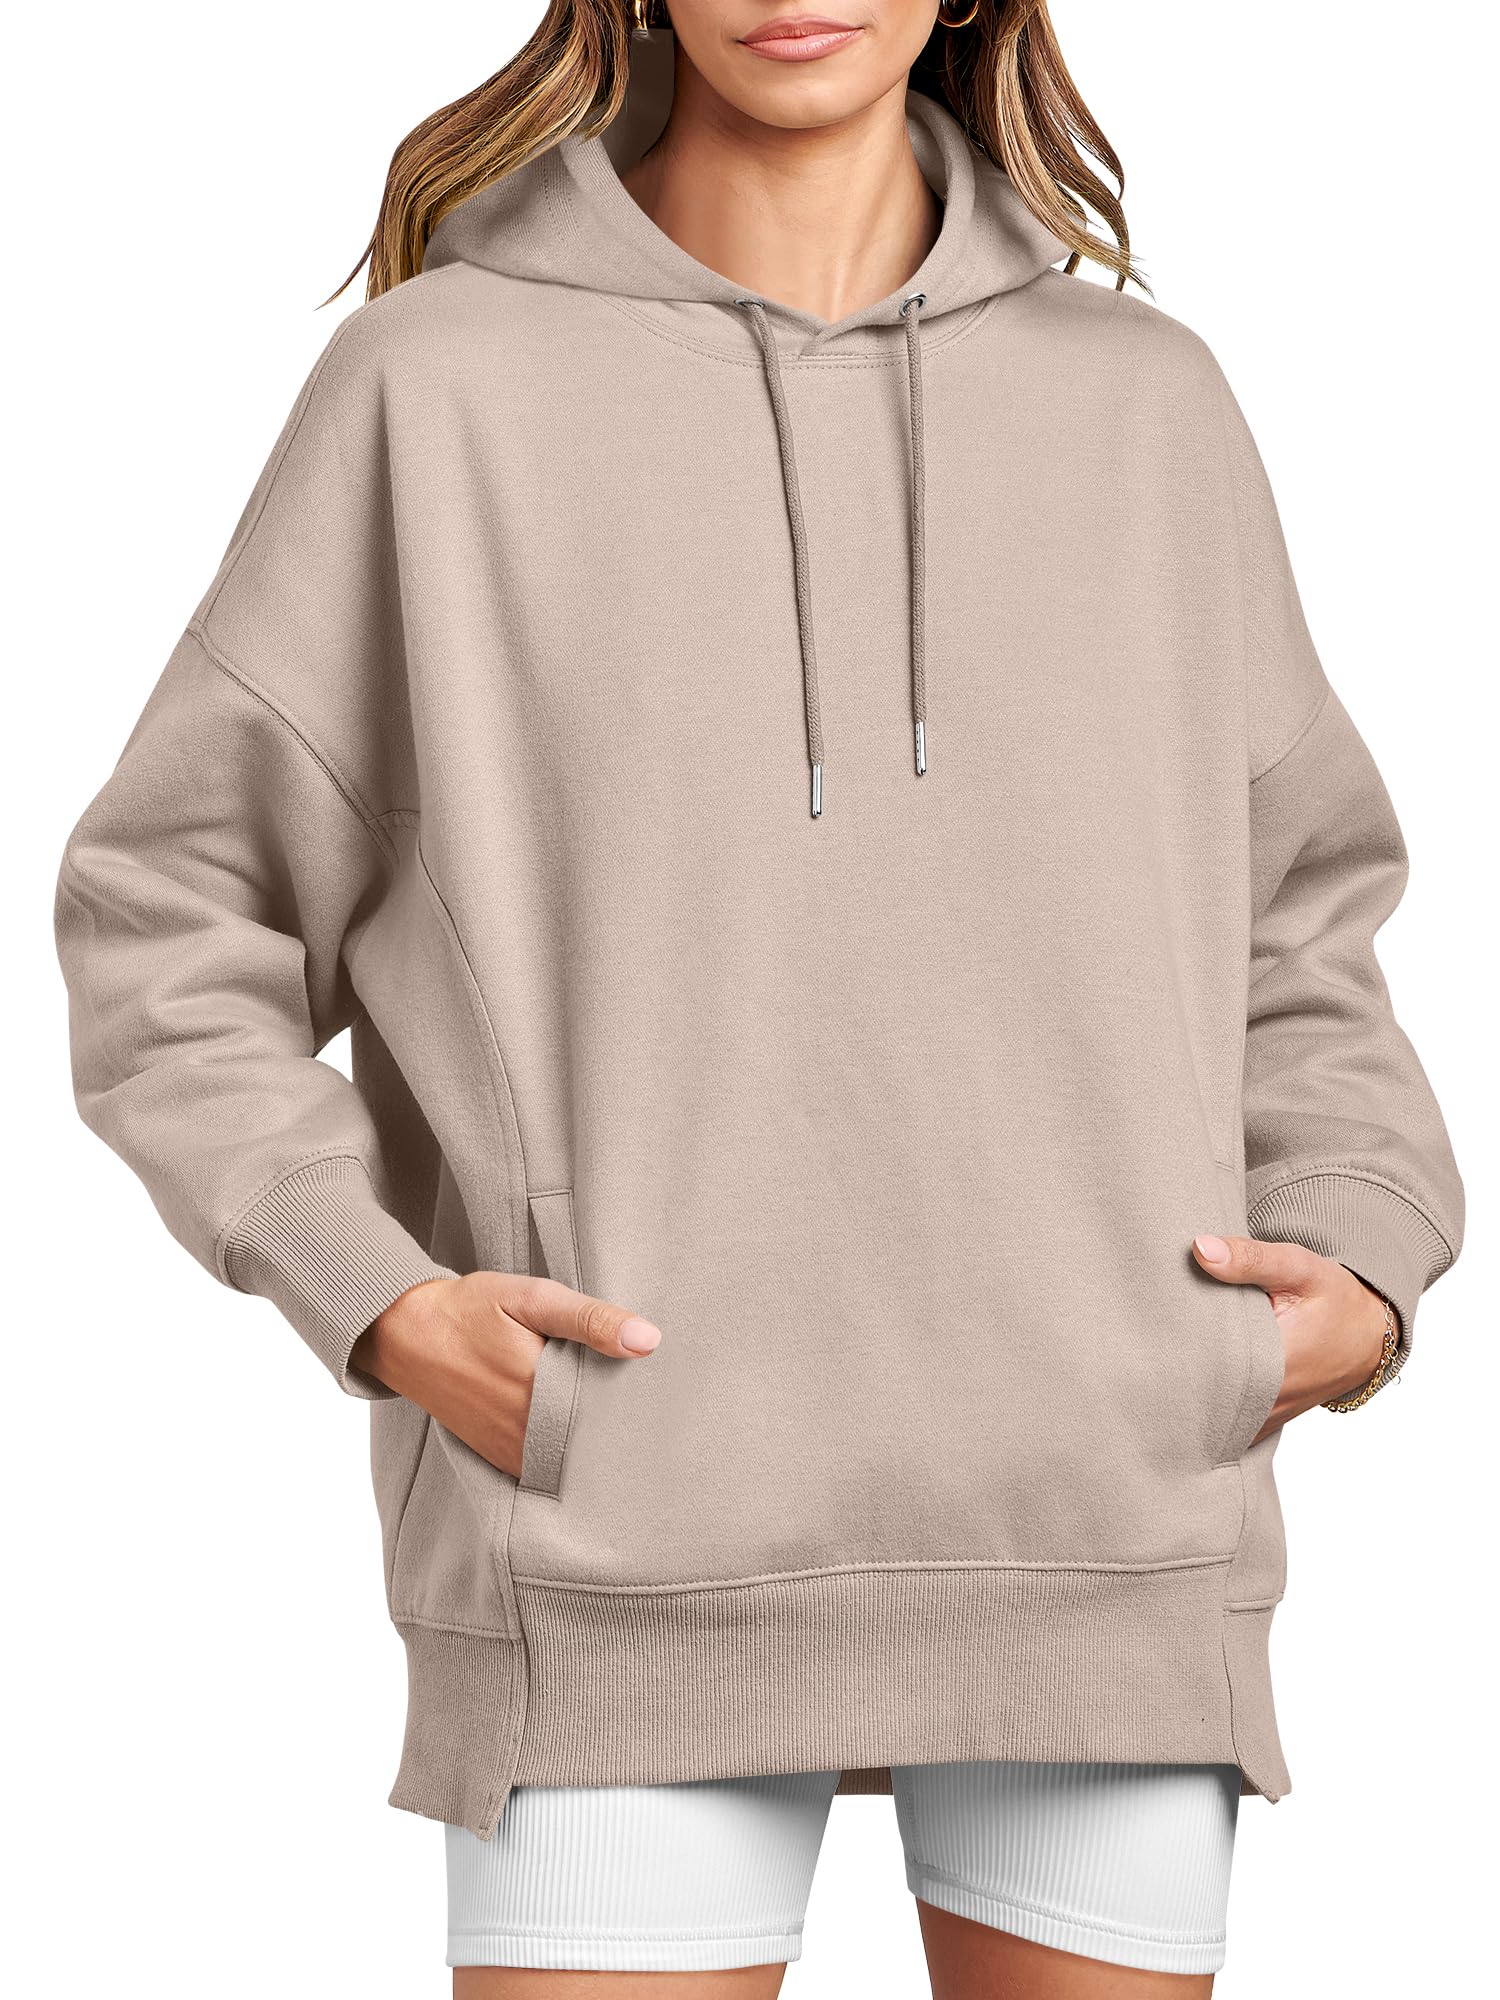 Classic Solid Color Plug -in Bag Hoodie(Buy 2 Free Shipping)